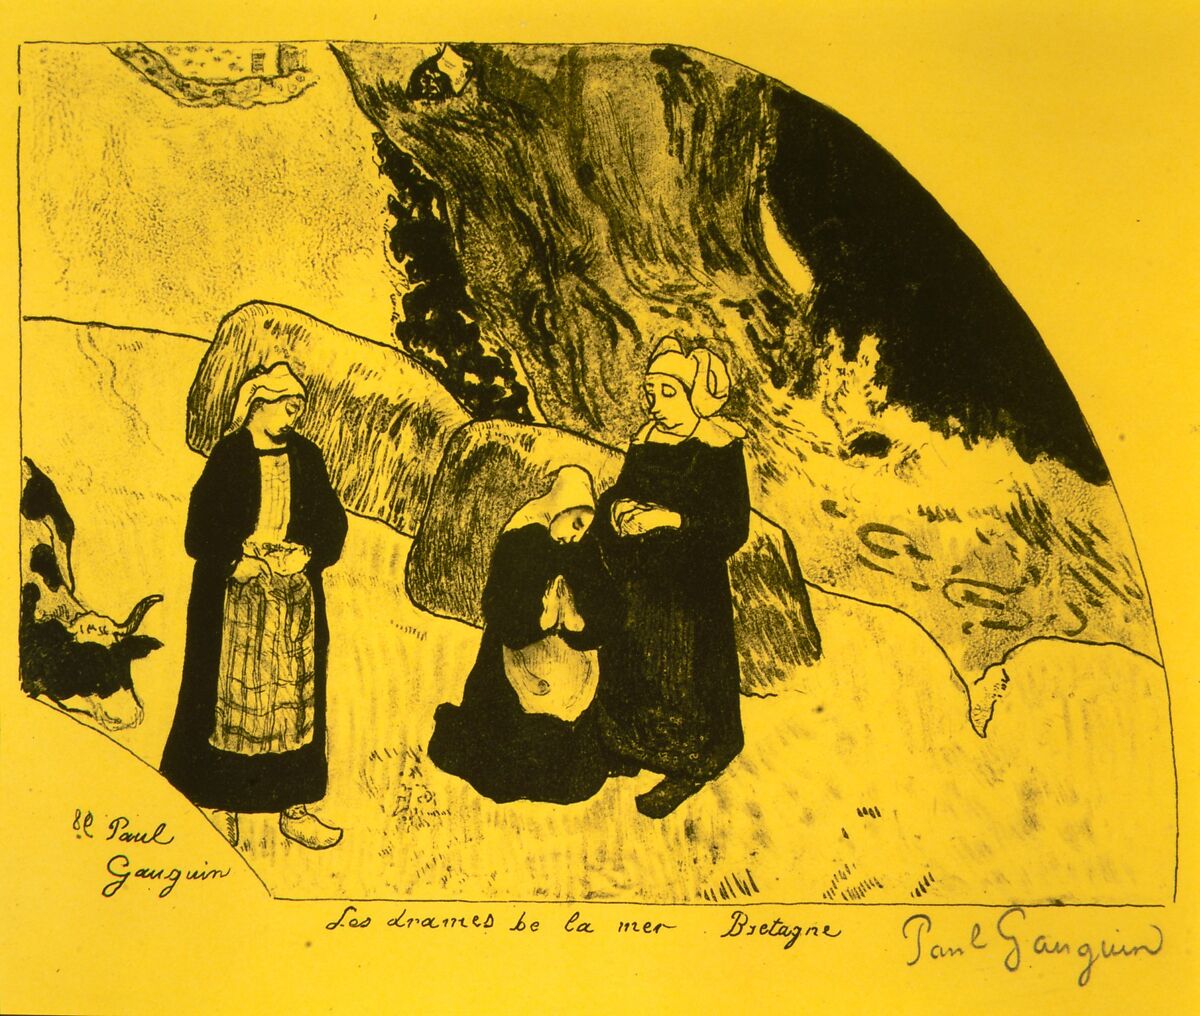 The Drama of the Sea, Brittany, from the "Volpini Suite: Dessins lithographiques", Paul Gauguin (French, Paris 1848–1903 Atuona, Hiva Oa, Marquesas Islands), Zincograph on chrome yellow wove paper; first edition 